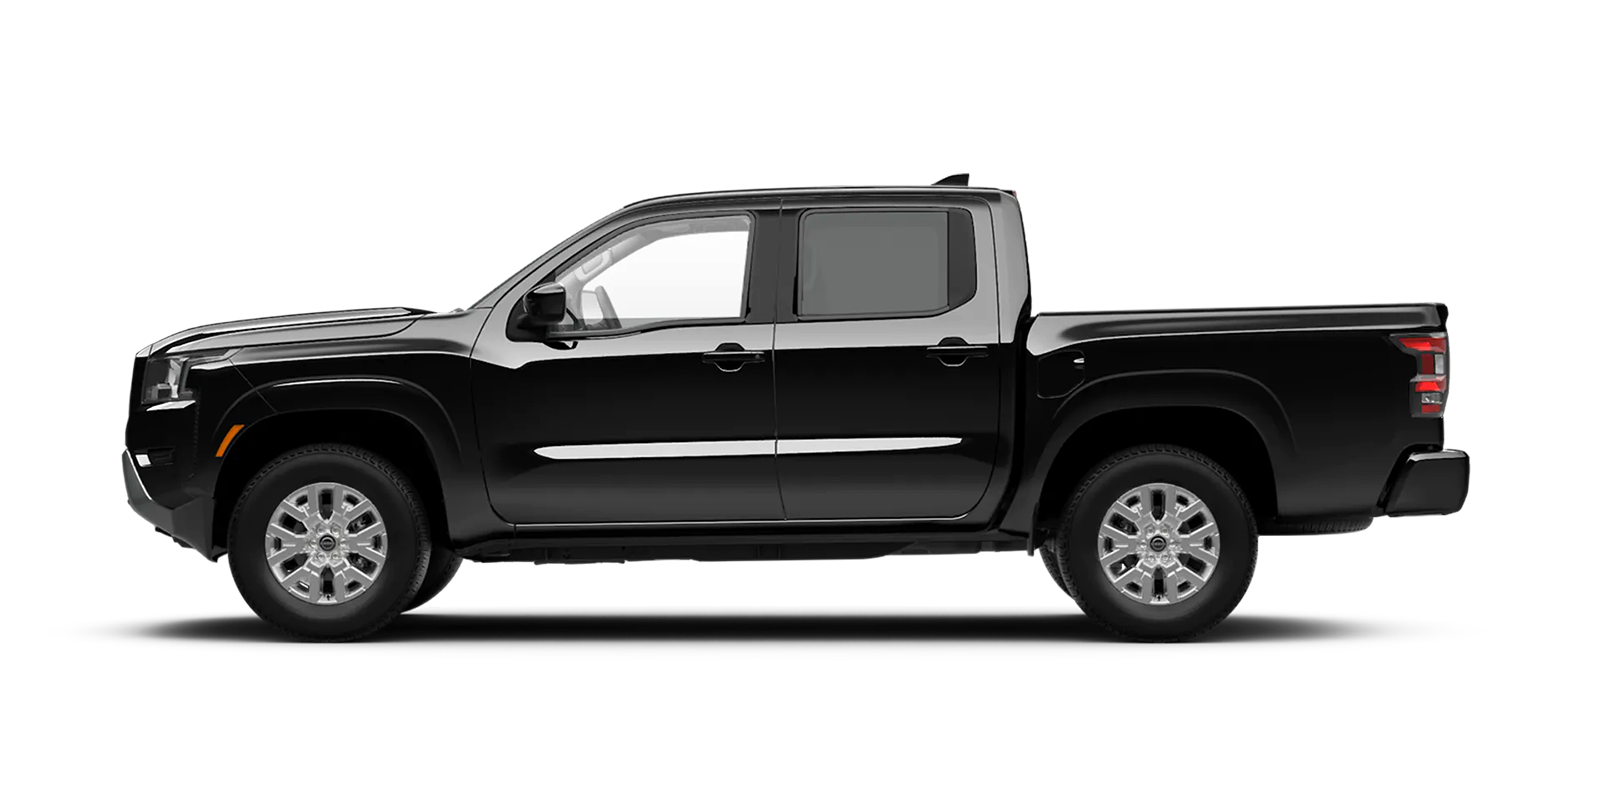 2022 Frontier Crew Cab SV 4x4 in Super Black | Wallace Nissan of Kingsport in Kingsport TN